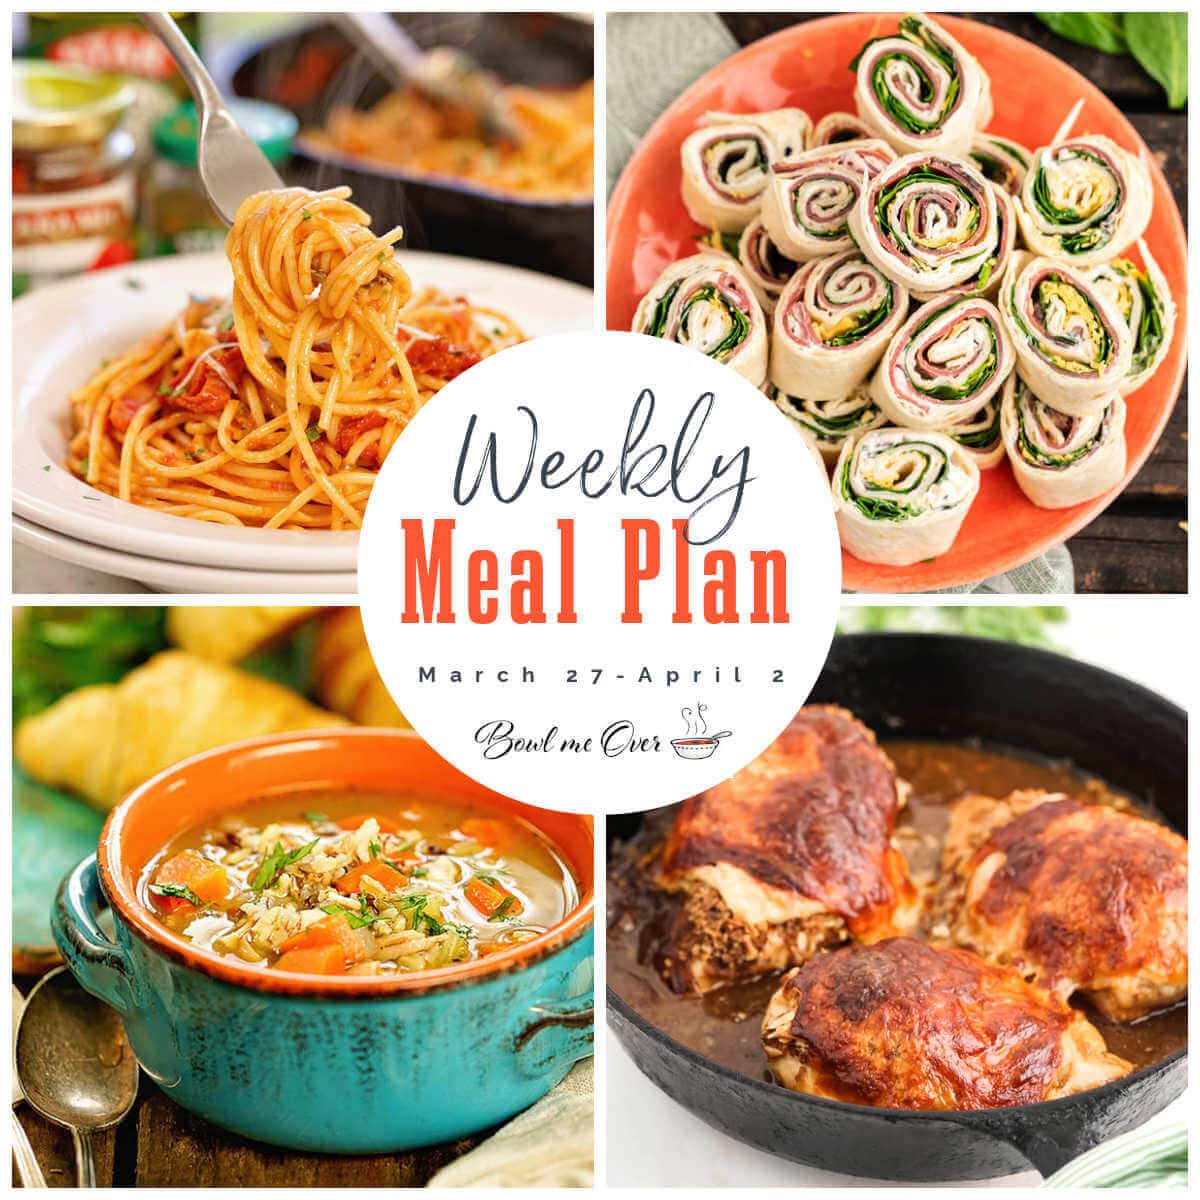 Collage of photos for weekly meal plan 13 for March 27-April 2, with print overlay.